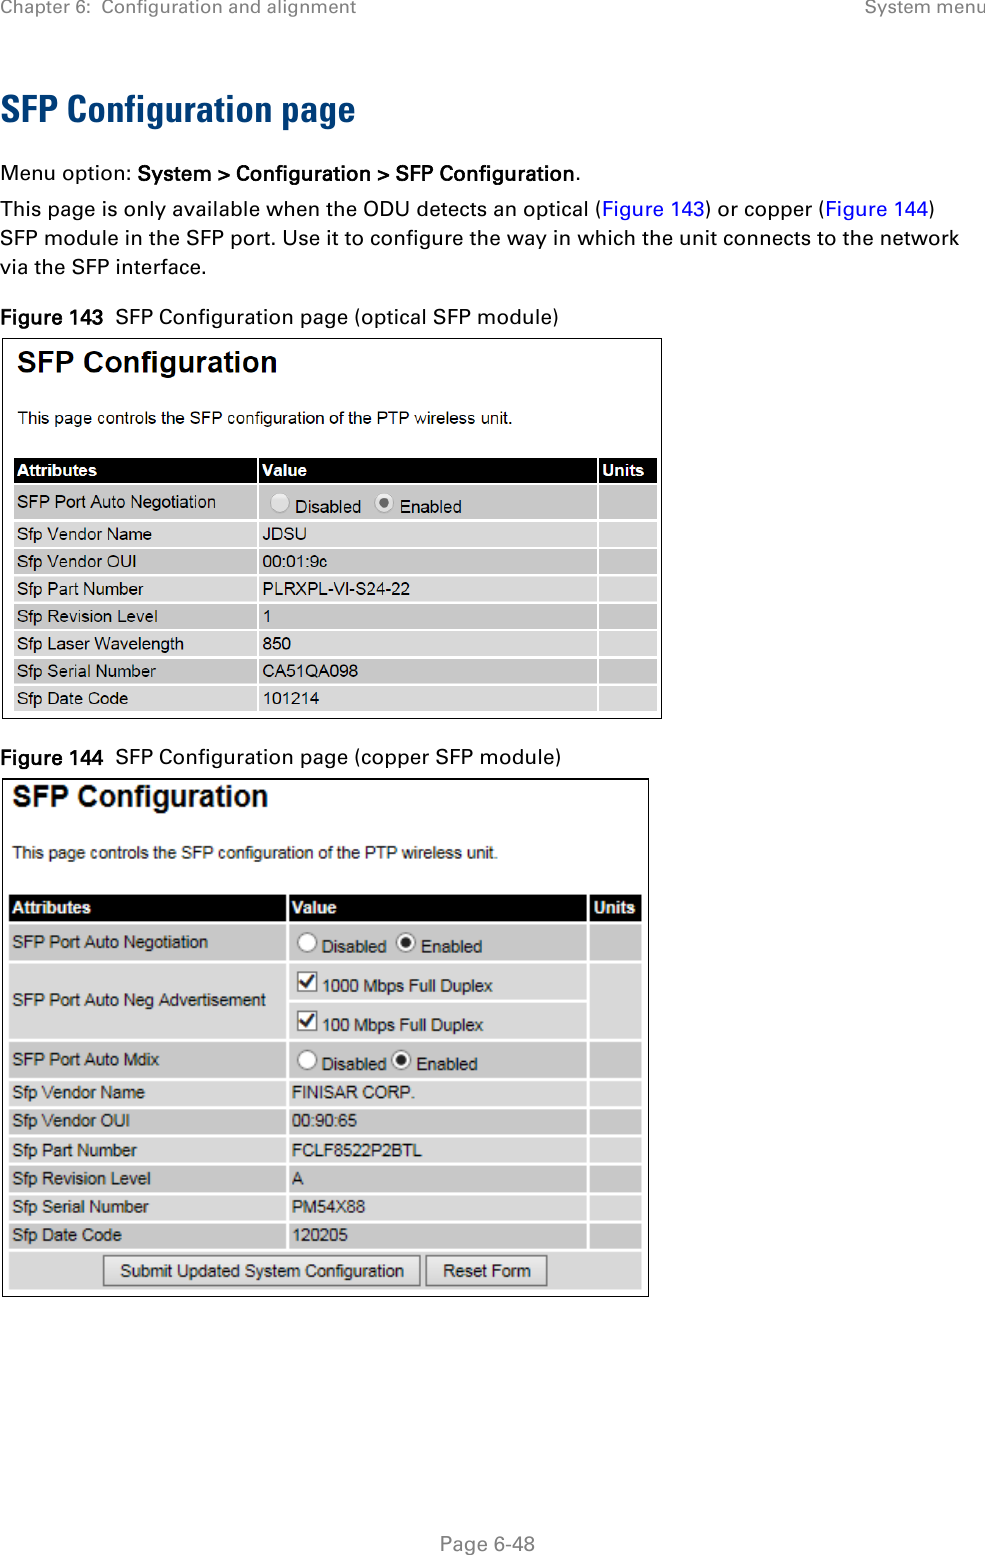 Chapter 6:  Configuration and alignment System menu  SFP Configuration page Menu option: System &gt; Configuration &gt; SFP Configuration. This page is only available when the ODU detects an optical (Figure 143) or copper (Figure 144) SFP module in the SFP port. Use it to configure the way in which the unit connects to the network via the SFP interface. Figure 143  SFP Configuration page (optical SFP module)  Figure 144  SFP Configuration page (copper SFP module)      Page 6-48 